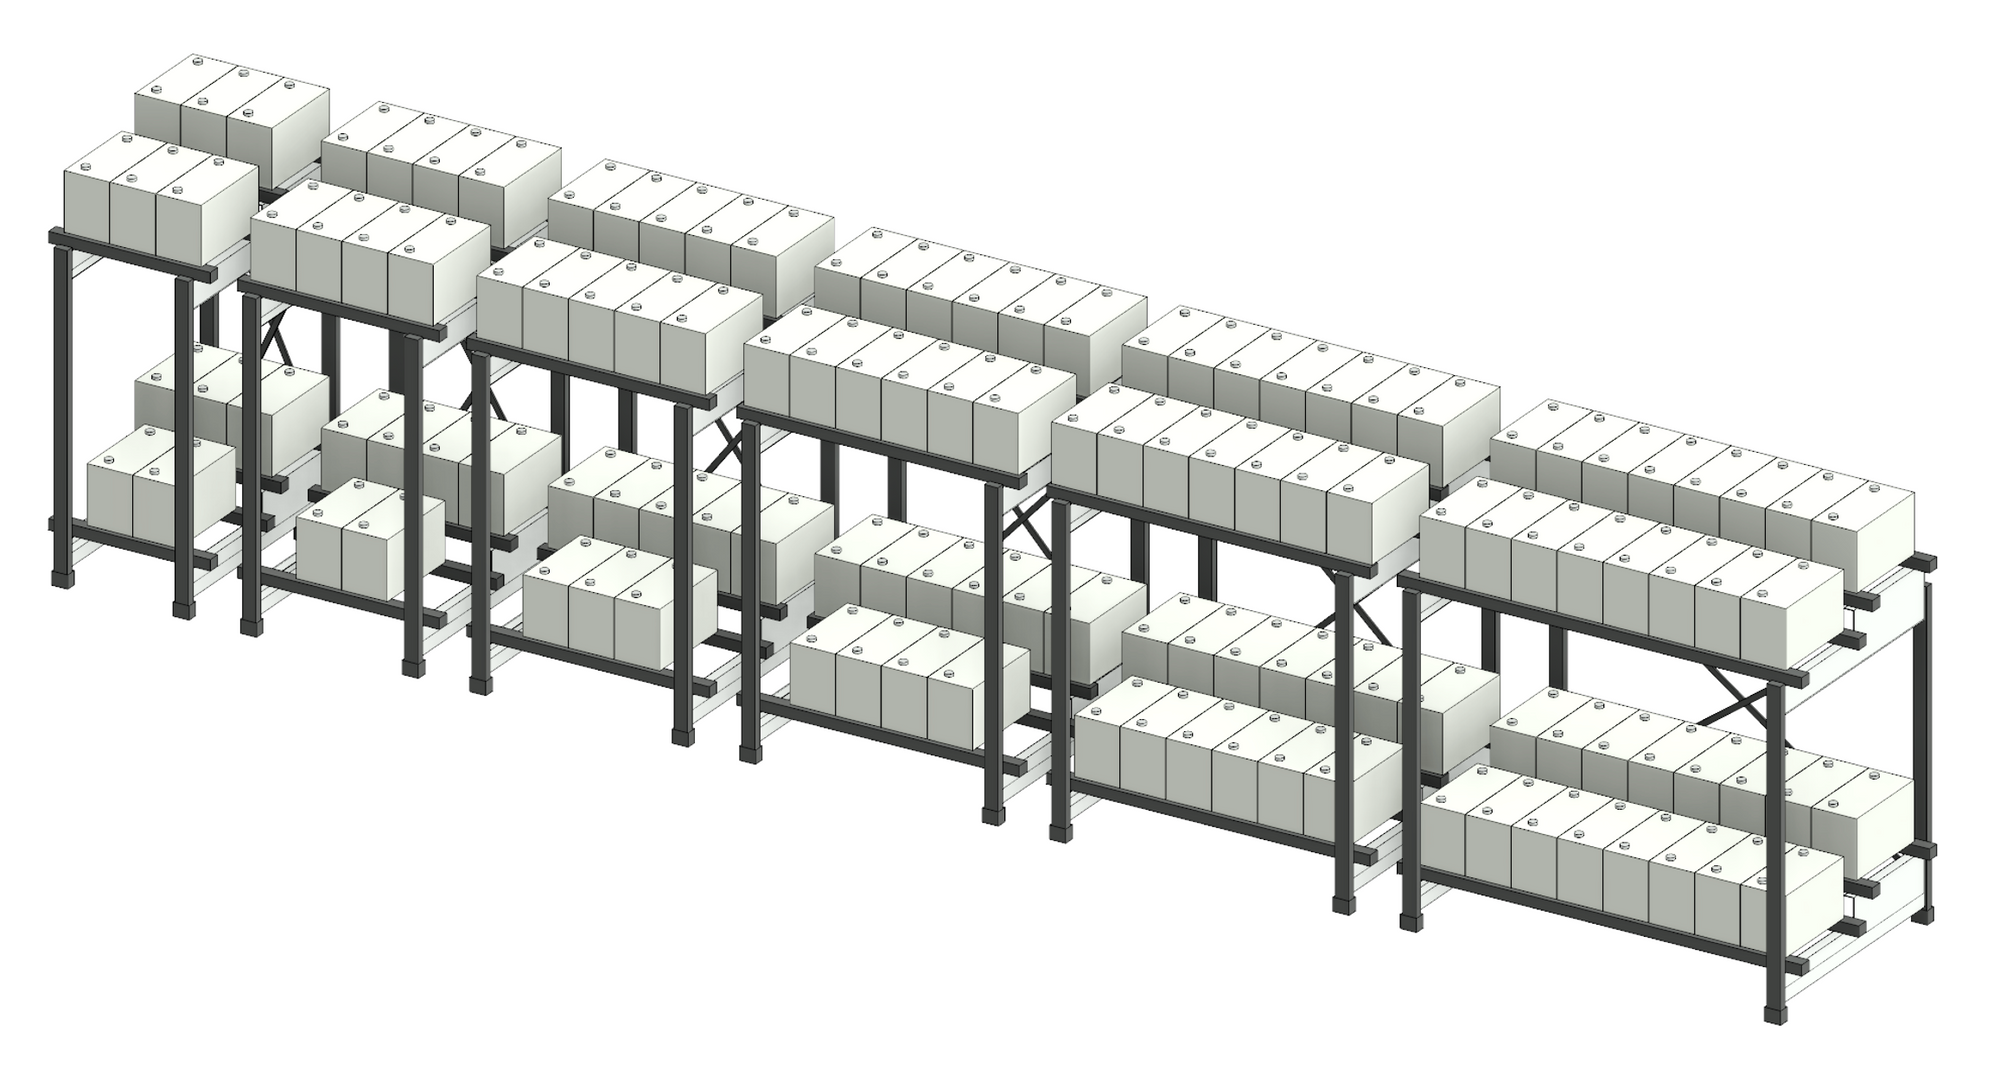 Revit 3D view showing some of the available types for the UPS battery rack.